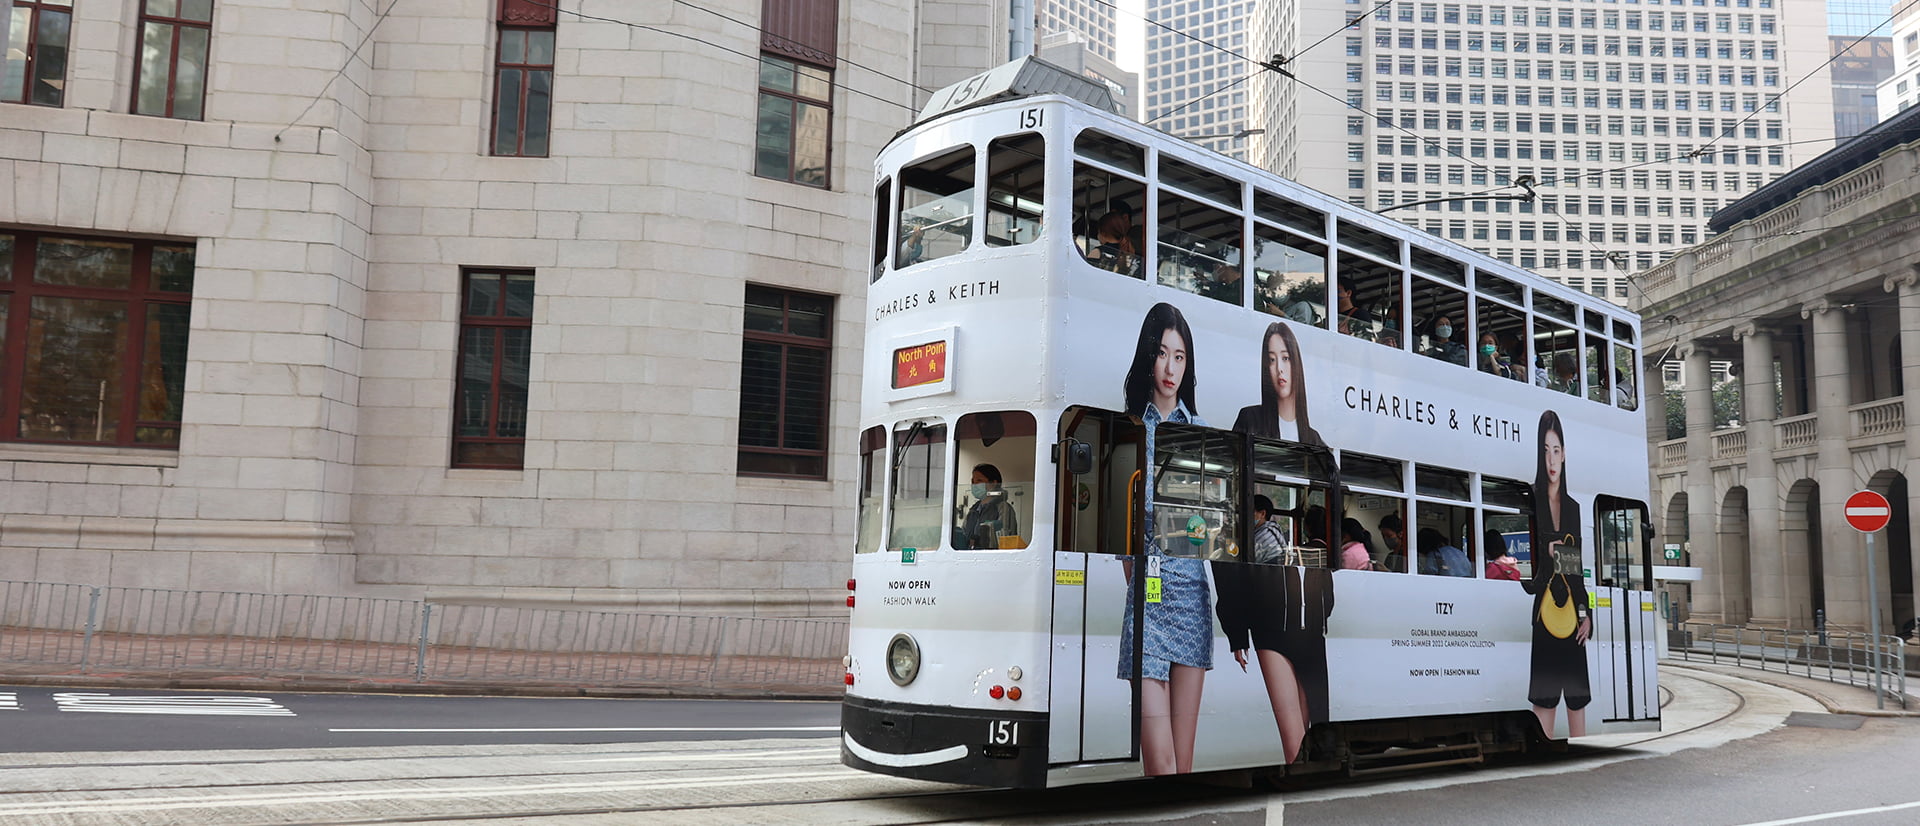 Images of CHARLES & KEITH’s Spring Summer 2023 camapaign with ITZY on Hong Kong’s iconic trams